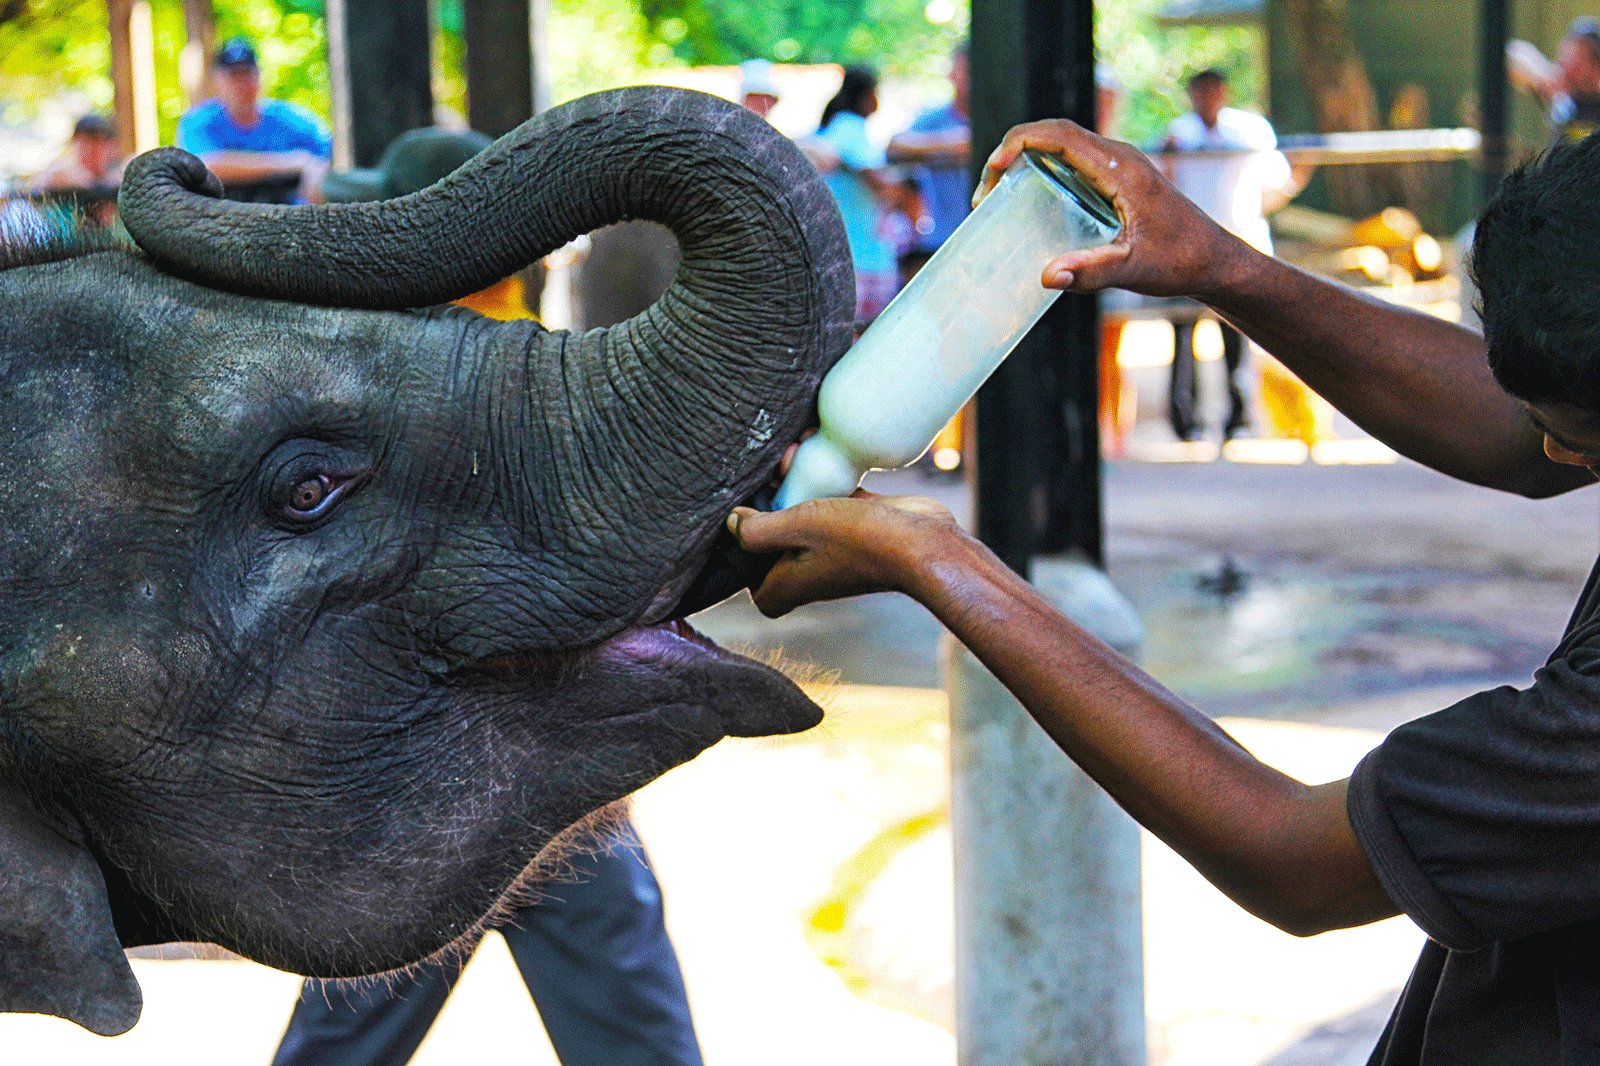 How to feed a baby elephant in Kandy